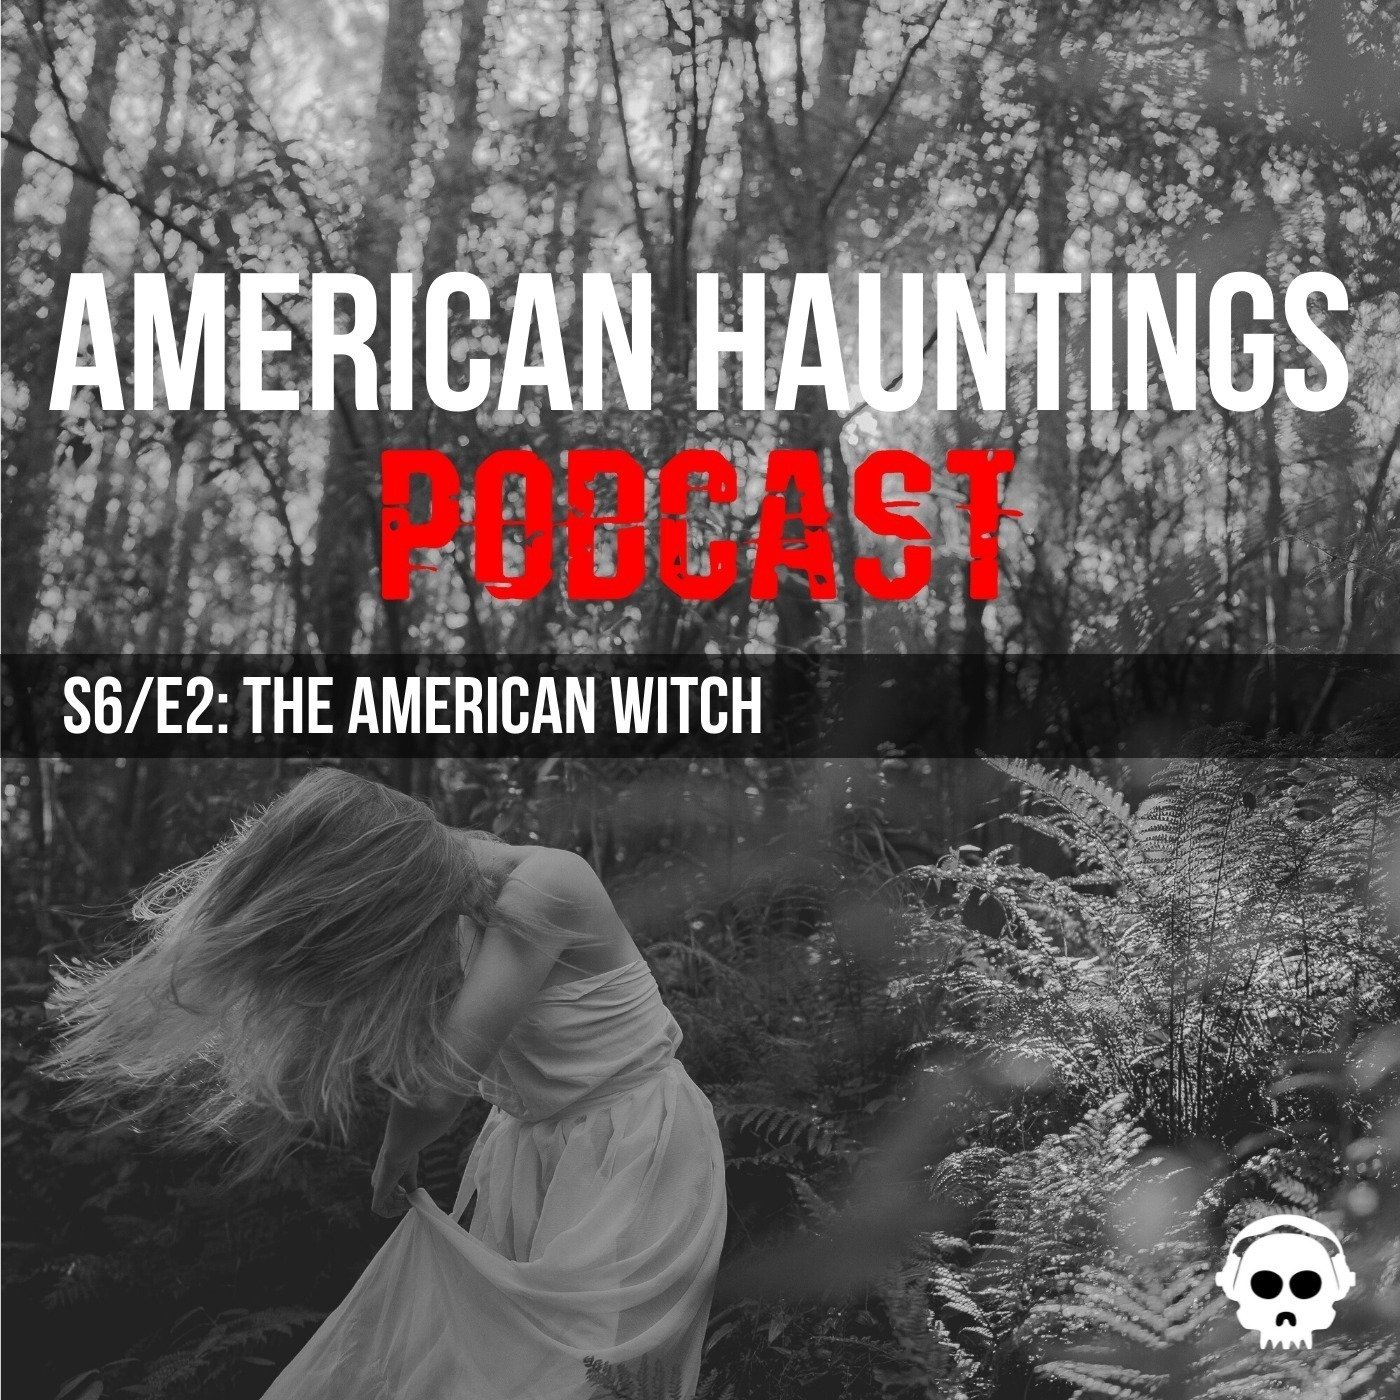 American Hauntings Podcast, Season 6, Episode 2, The American Witch (Copy)